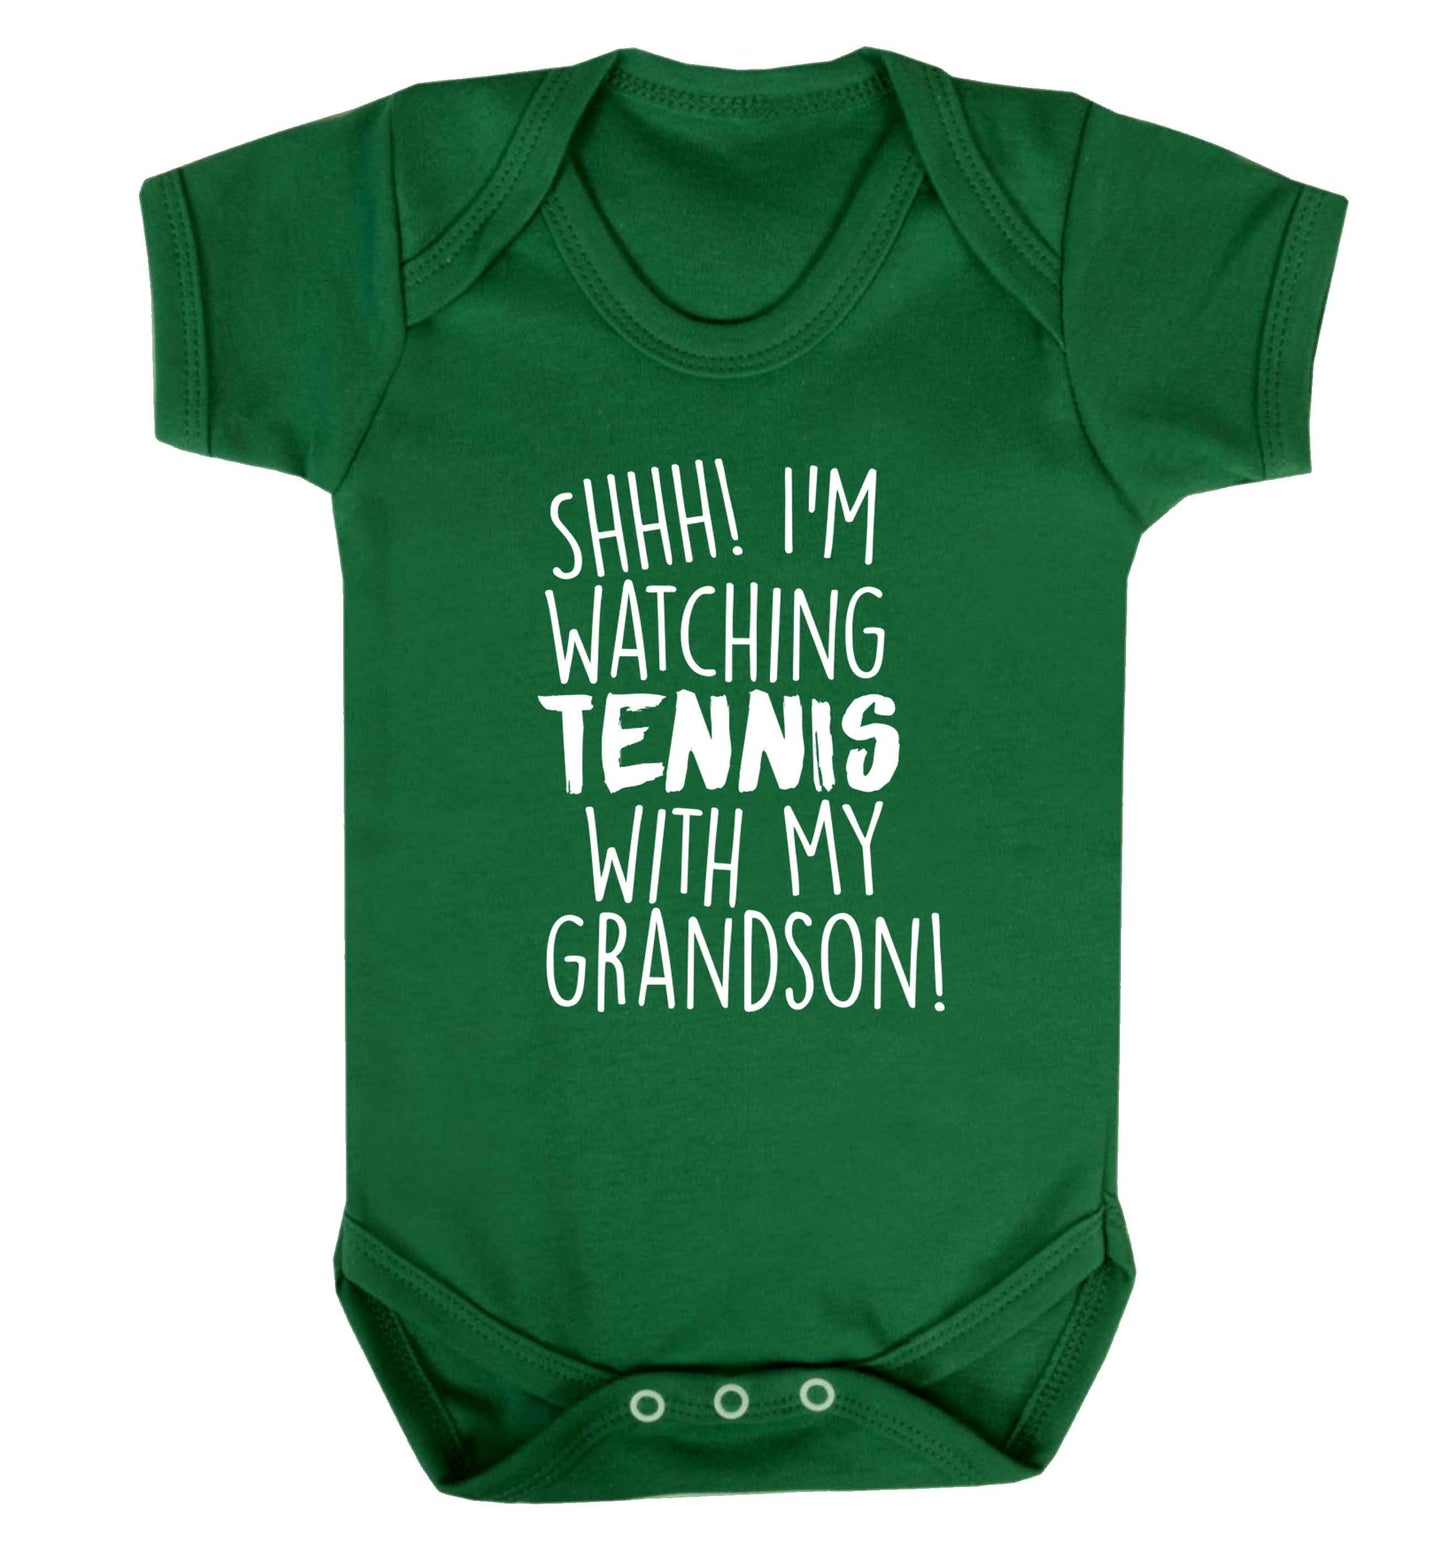 Shh! I'm watching tennis with my grandson! Baby Vest green 18-24 months